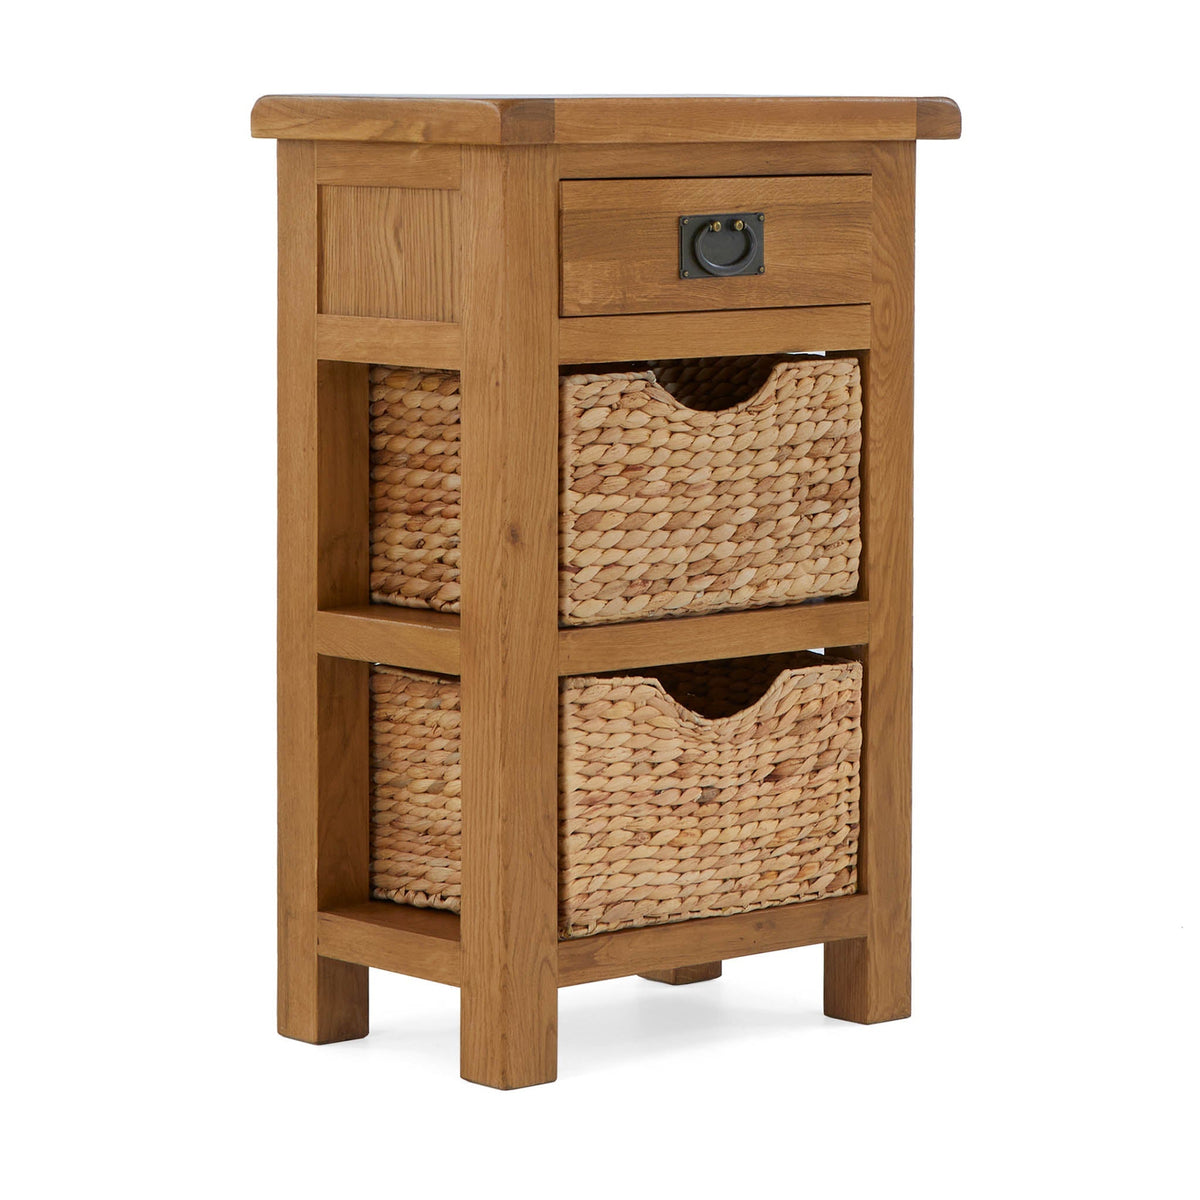 Zelah Oak Telephone Table with Baskets by Roseland Furniture